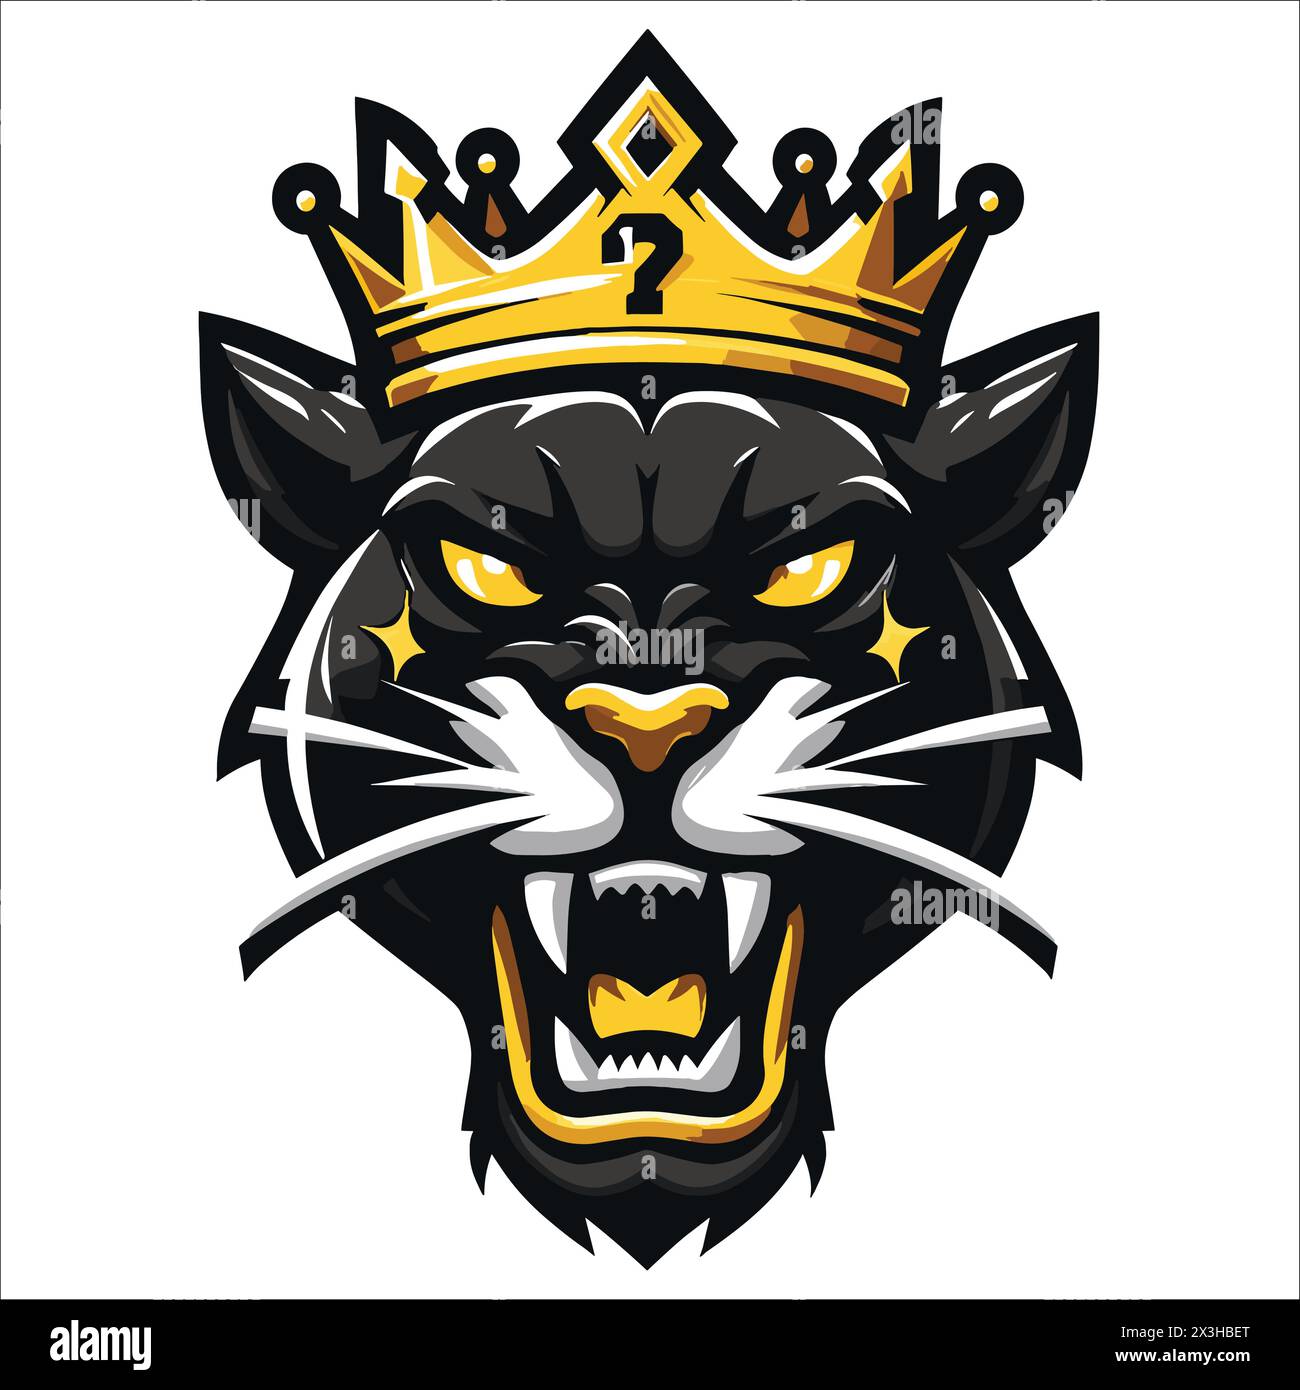 Angry Panther head mascot design Stock Vector